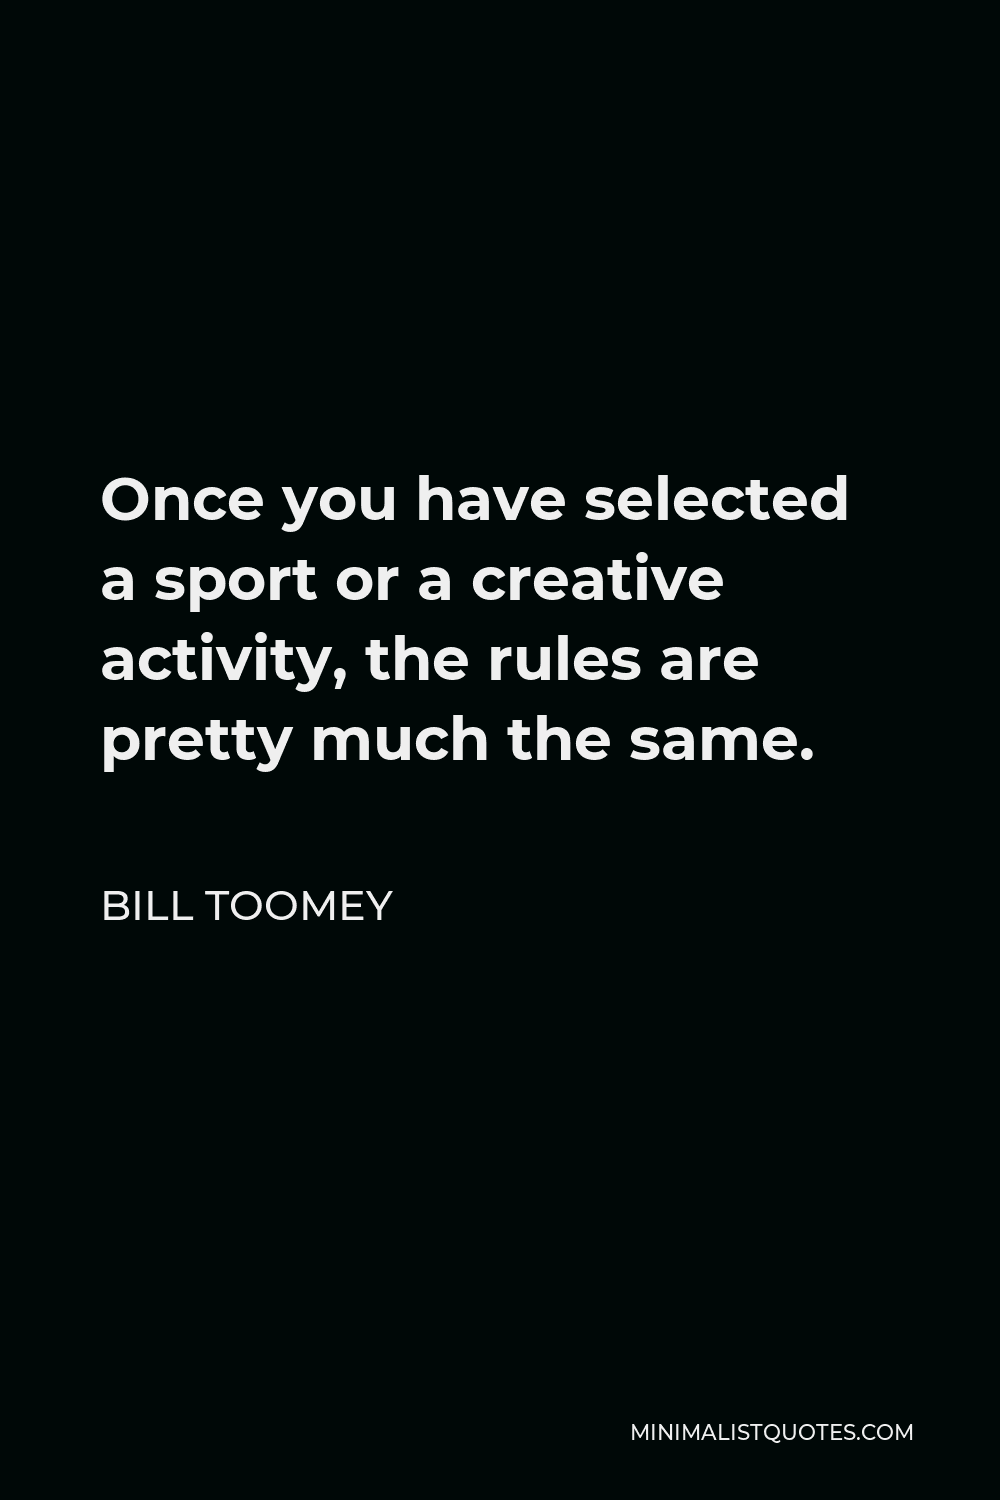 Bill Toomey Quote - Once you have selected a sport or a creative activity, the rules are pretty much the same.